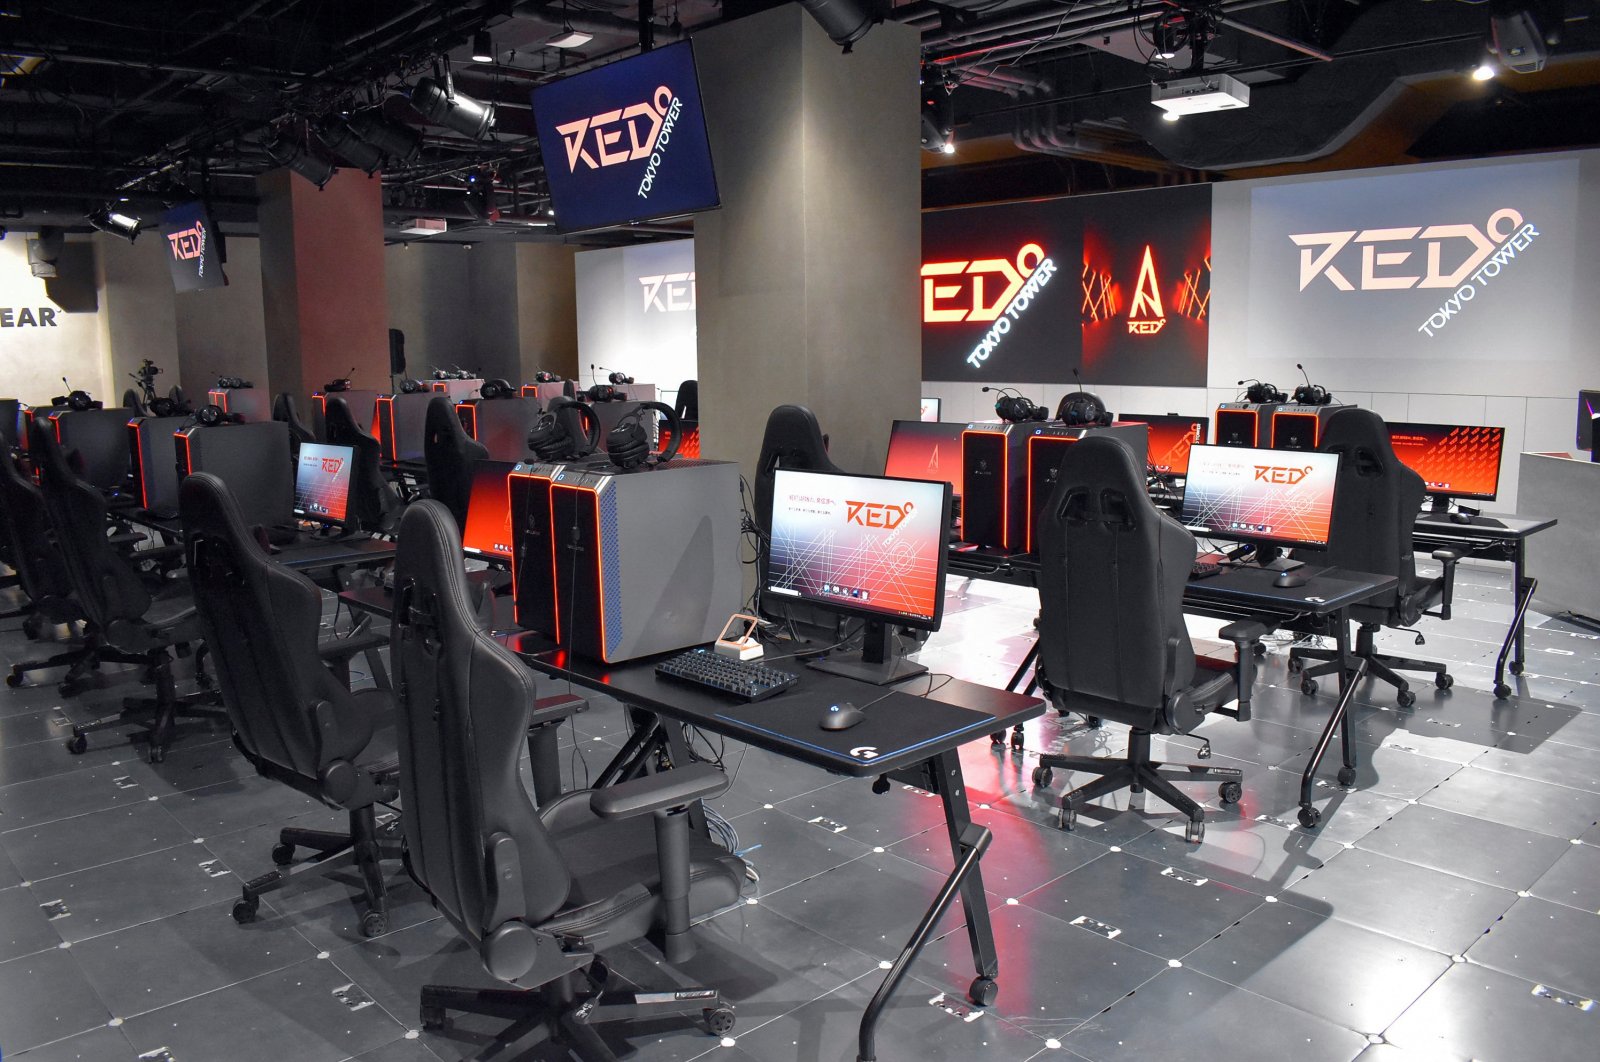 A view of the Red Tokyo Tower esports park, Tokyo, Japan, April 20, 2022. (Reuters Photo)